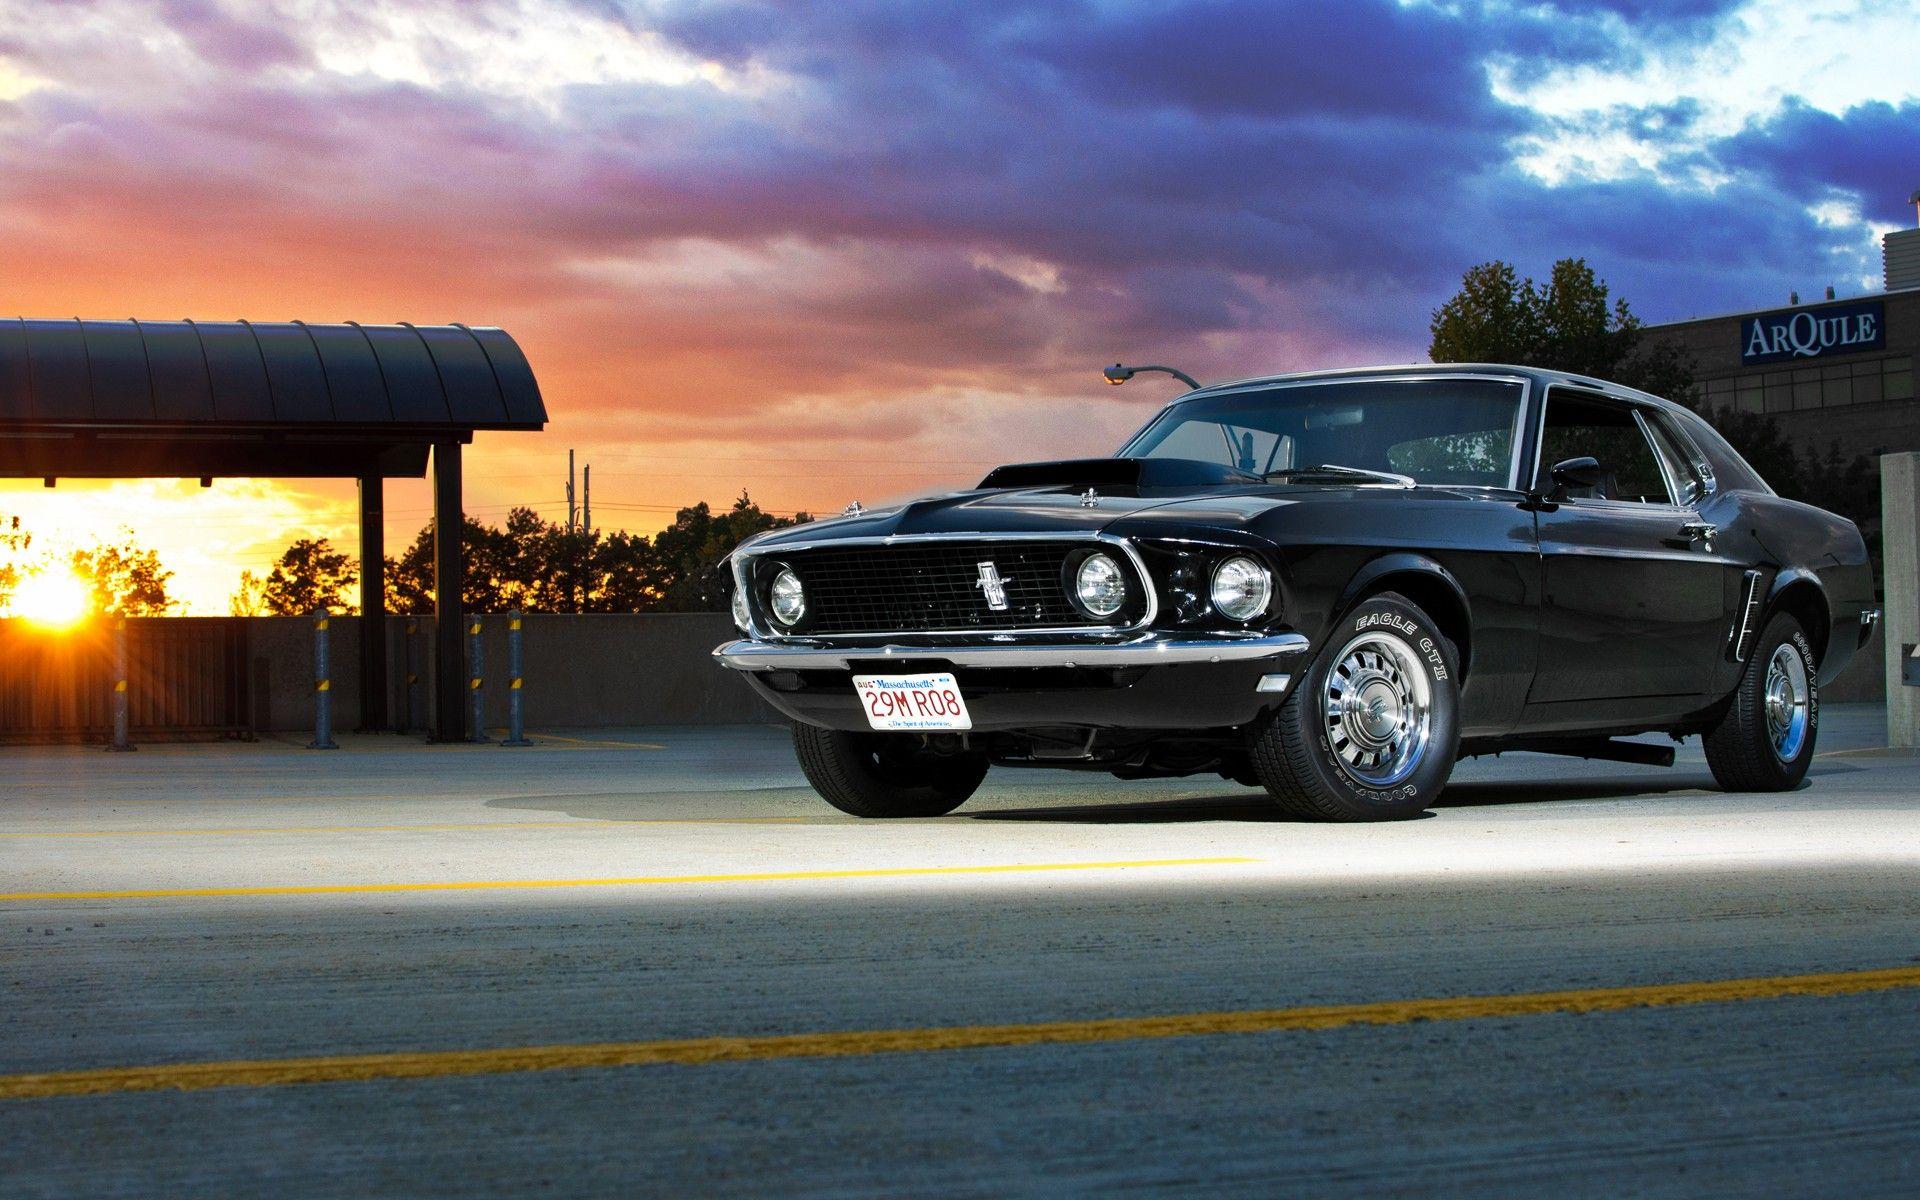 American Muscle Cars Wallpaper HD Image Full Car For Mobile